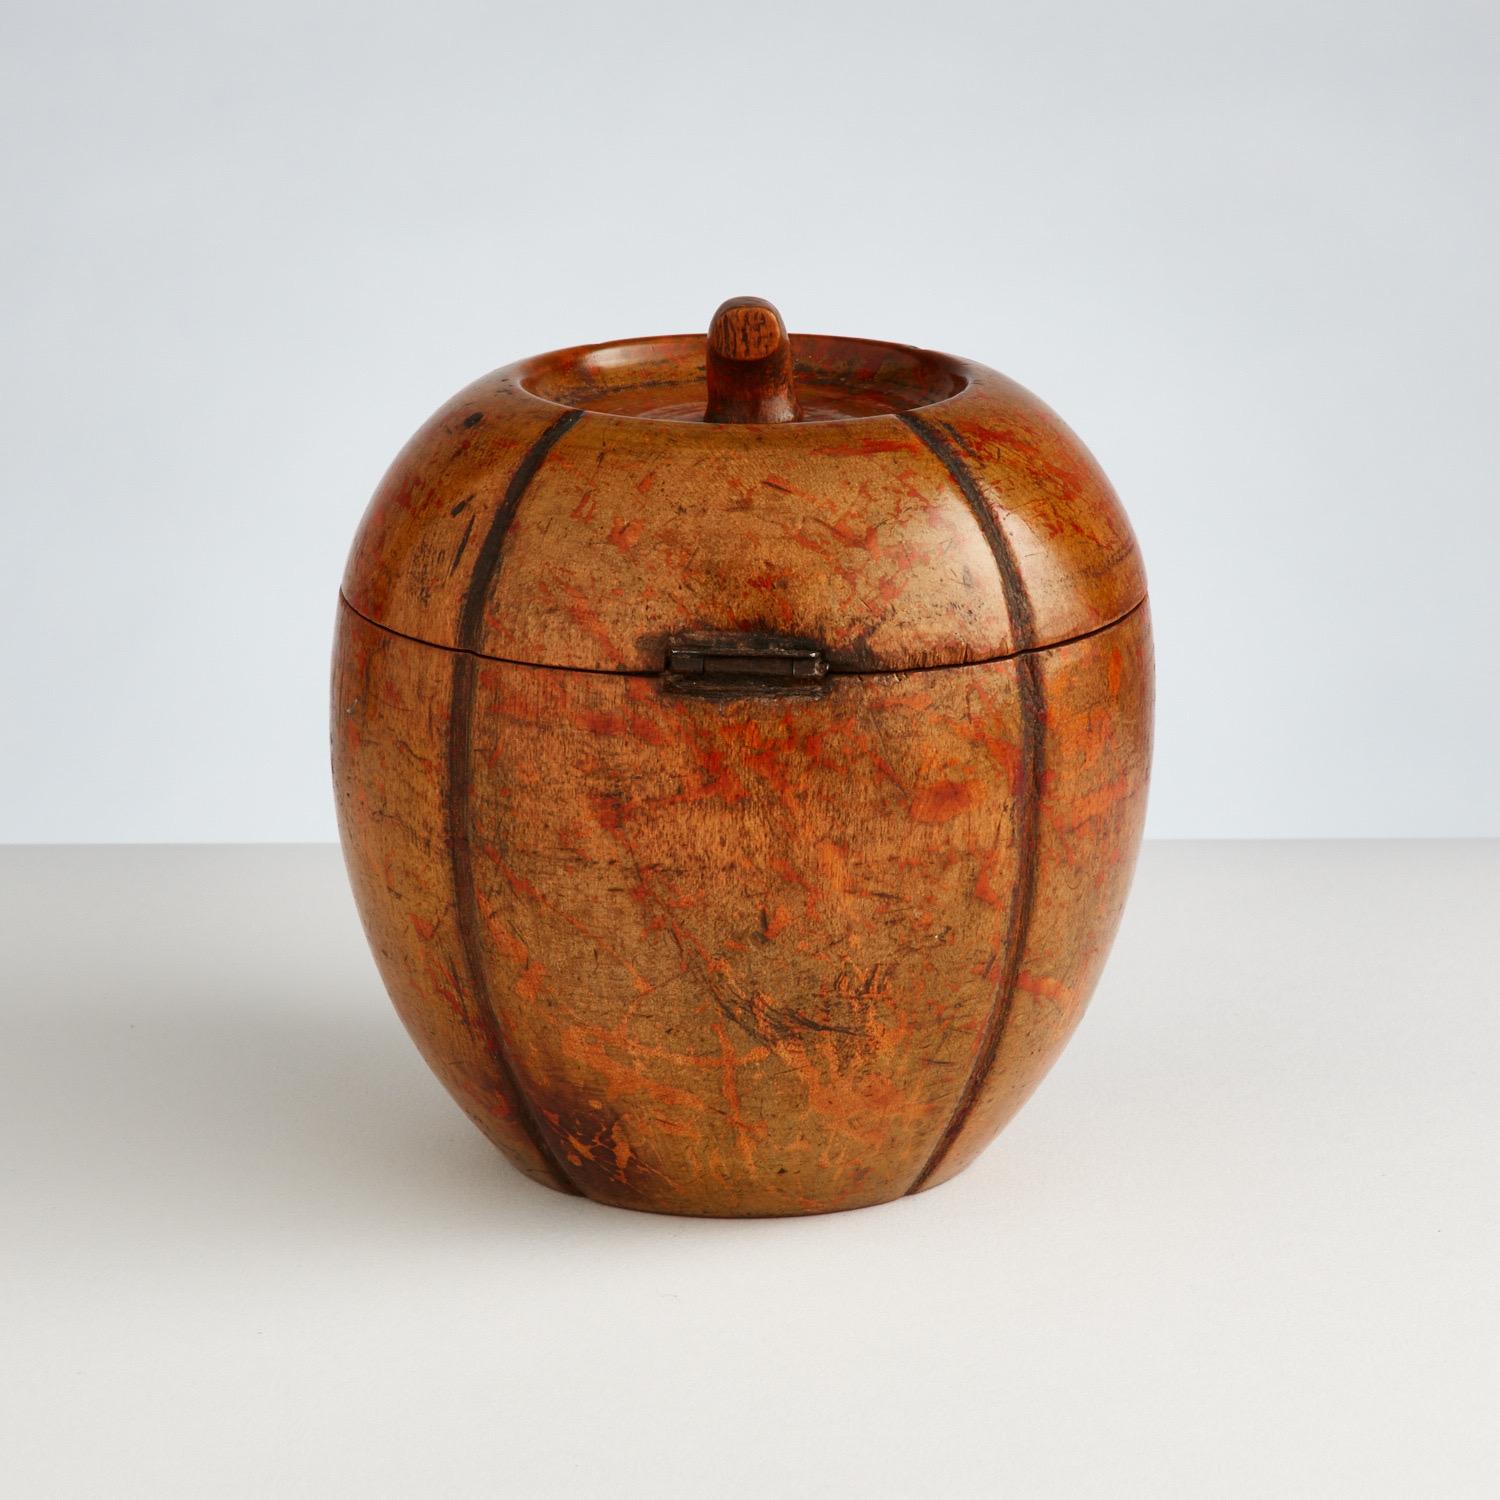 Antique Melon fruit wood Tea Caddy Date 1790-1800
Origin English

This Early fruit wood tea Caddy is in excellent condition and it has the most beautiful original patina.
The hinge and front small front escutcheon are in good order and the interior